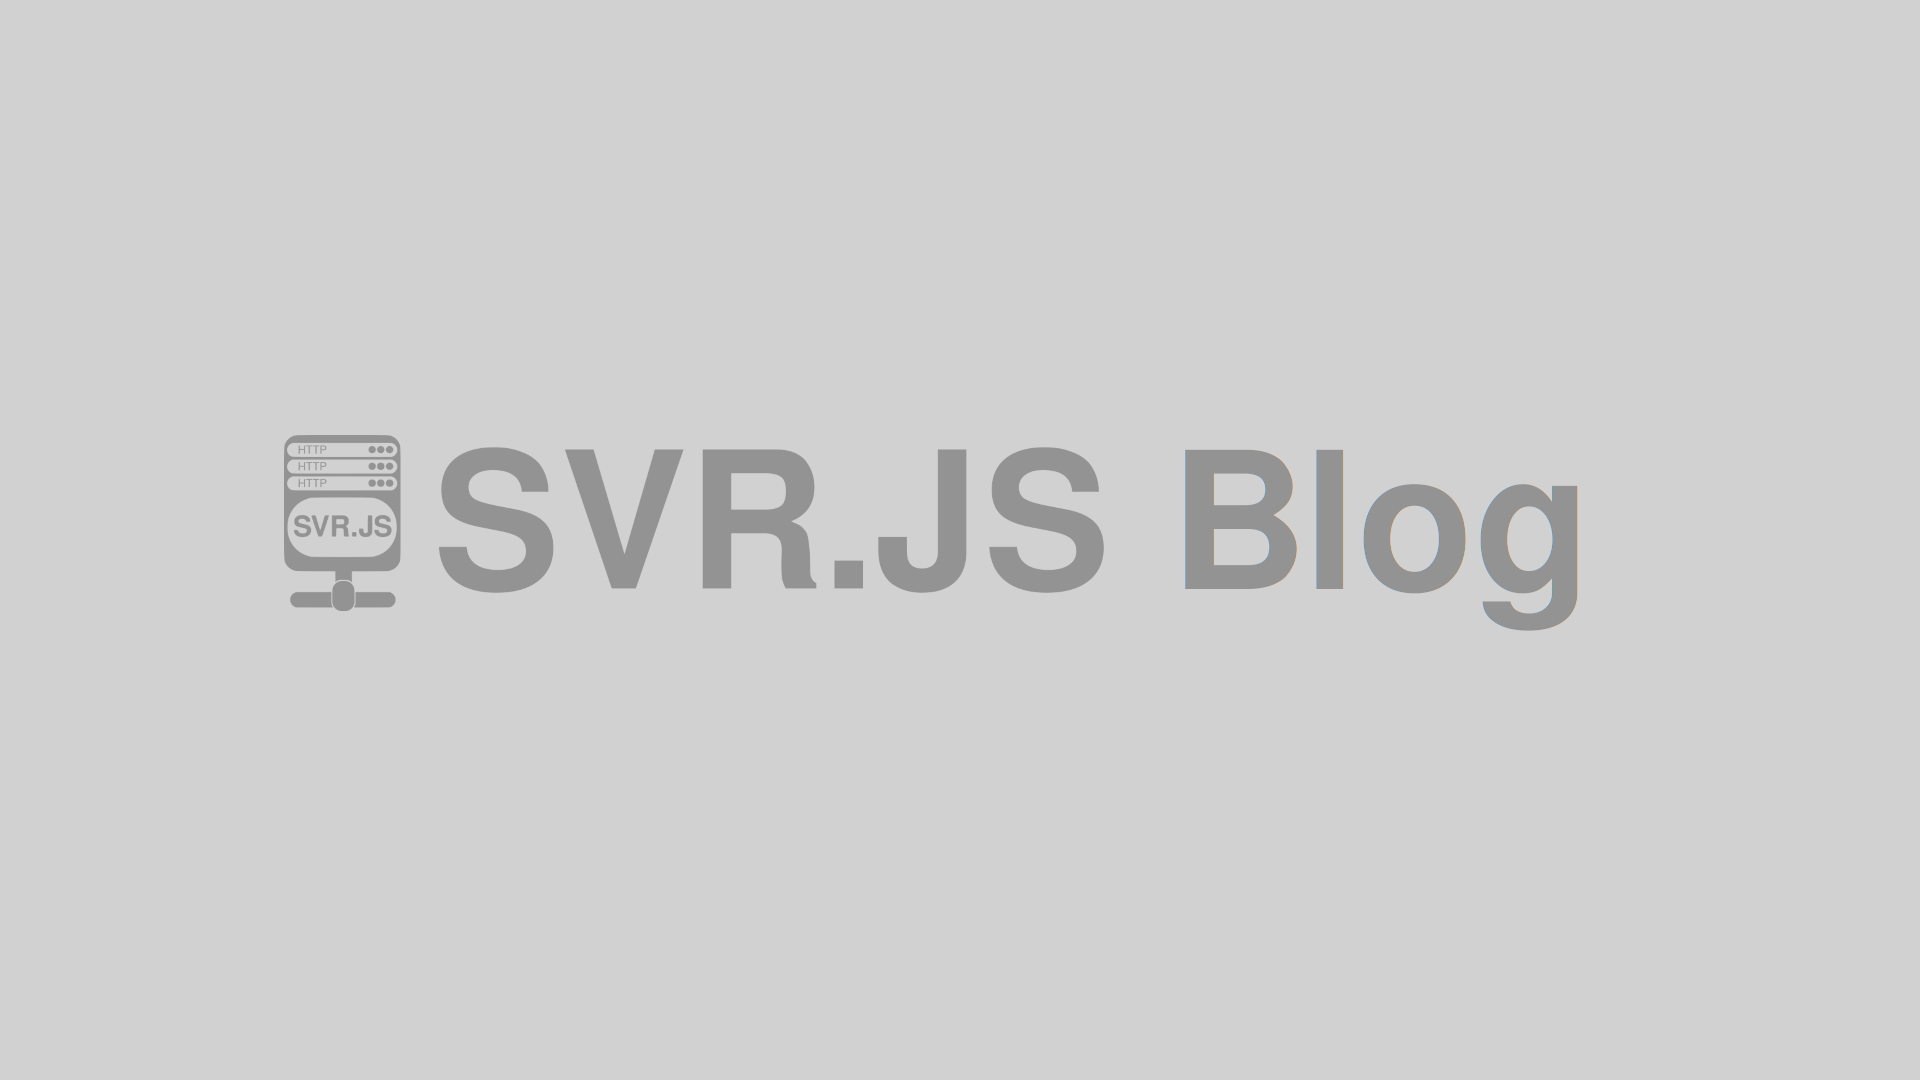 IMPORTANT! Future versions of SVR.JS may drop support for Node.JS 8.x and 9.x